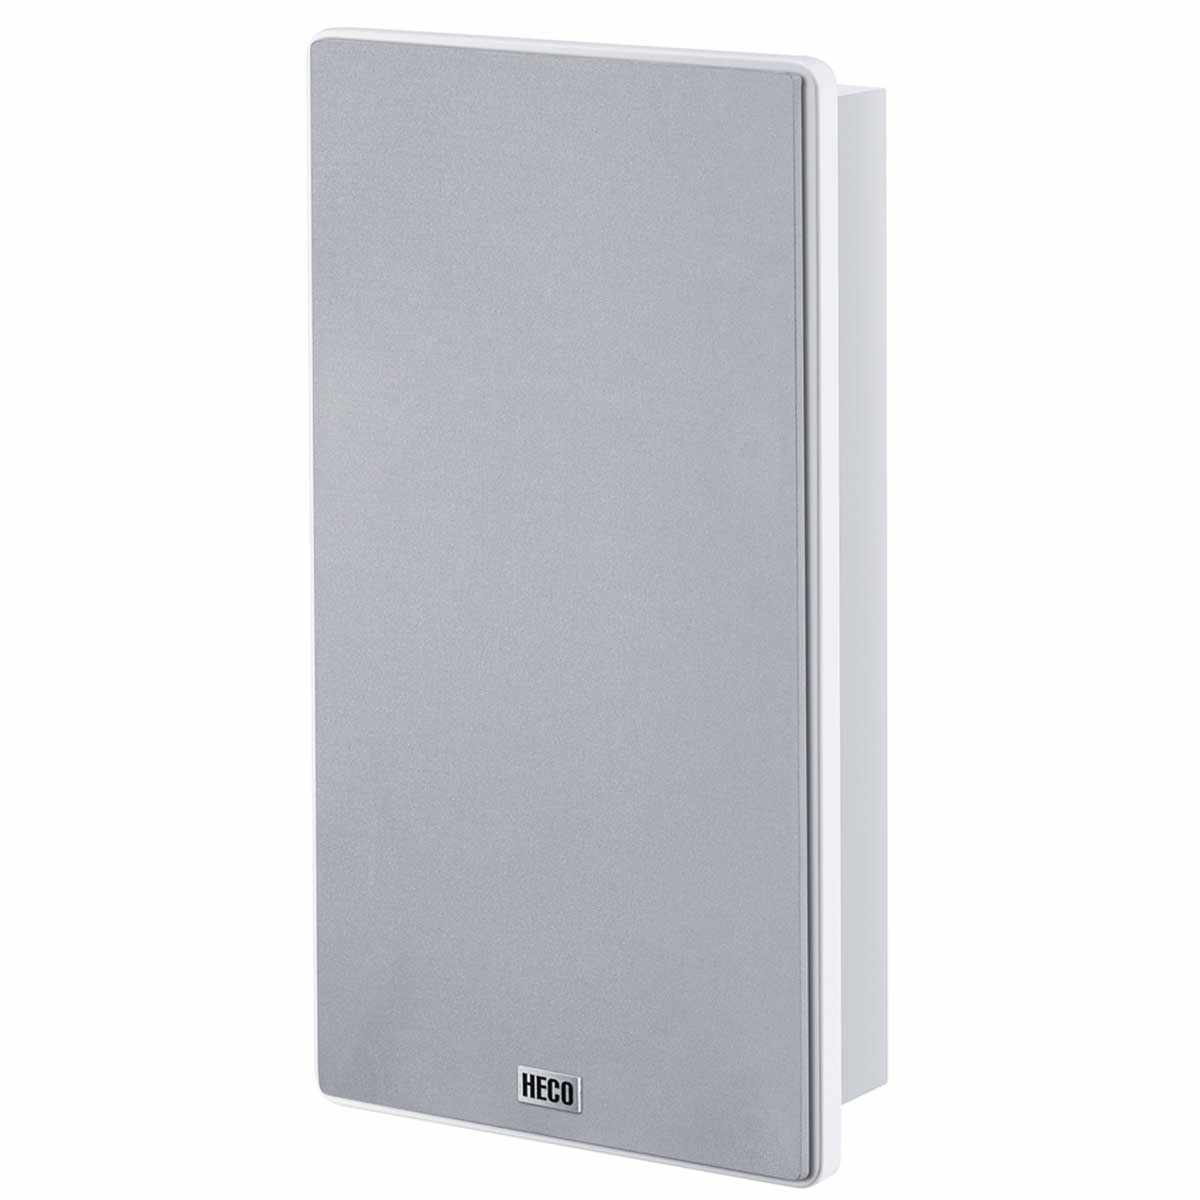 HECO Ambient 11F On-Wall Speaker, White, front angle with light grey grille